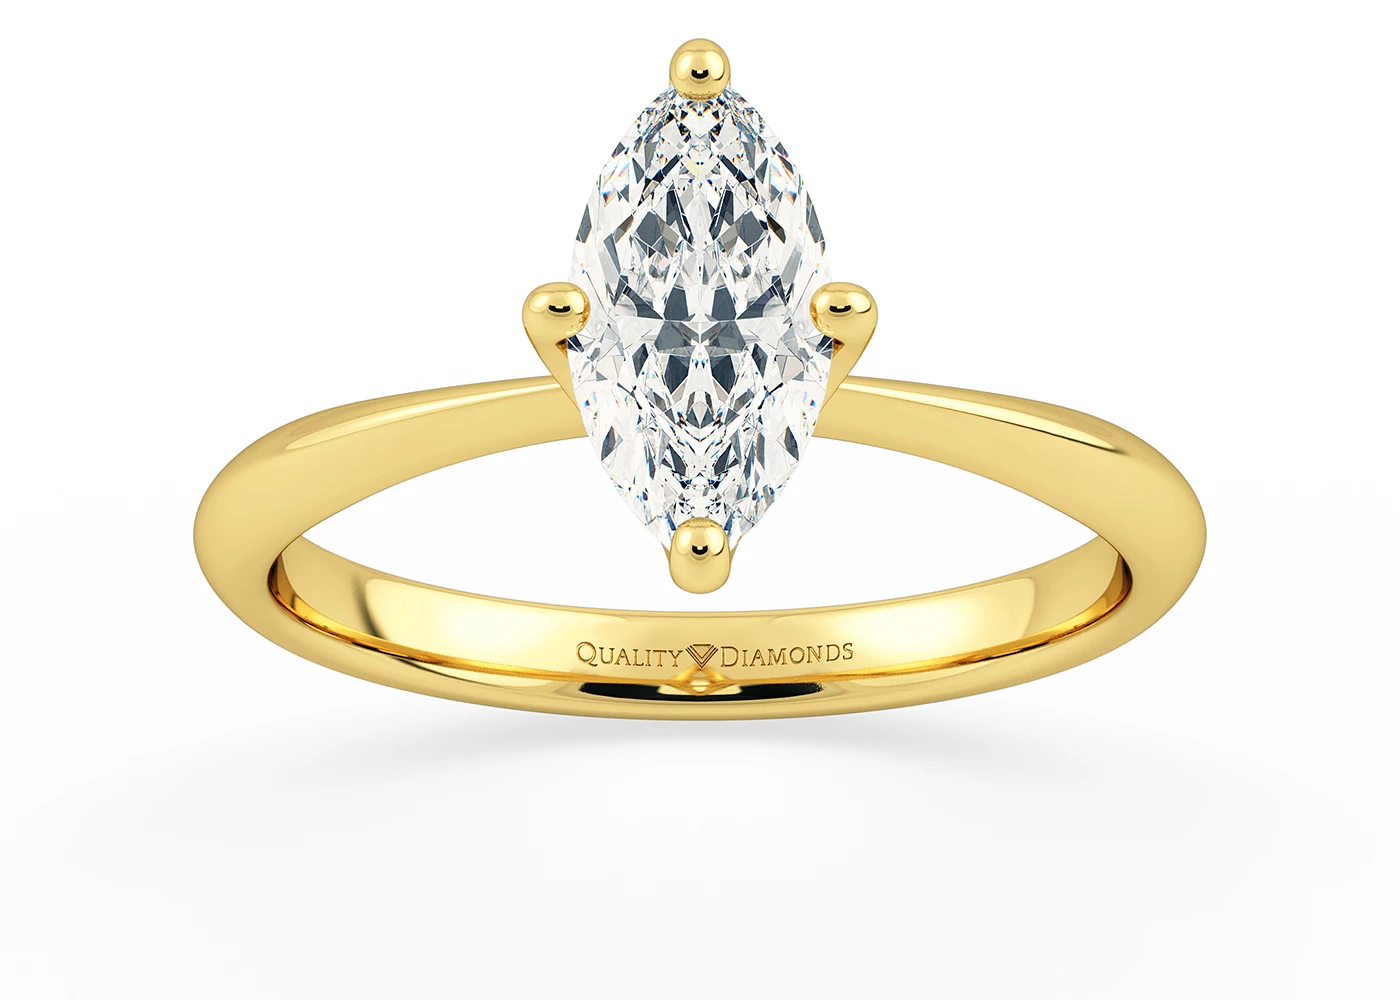 Marquise Amorette Diamond Ring in 9K Yellow Gold